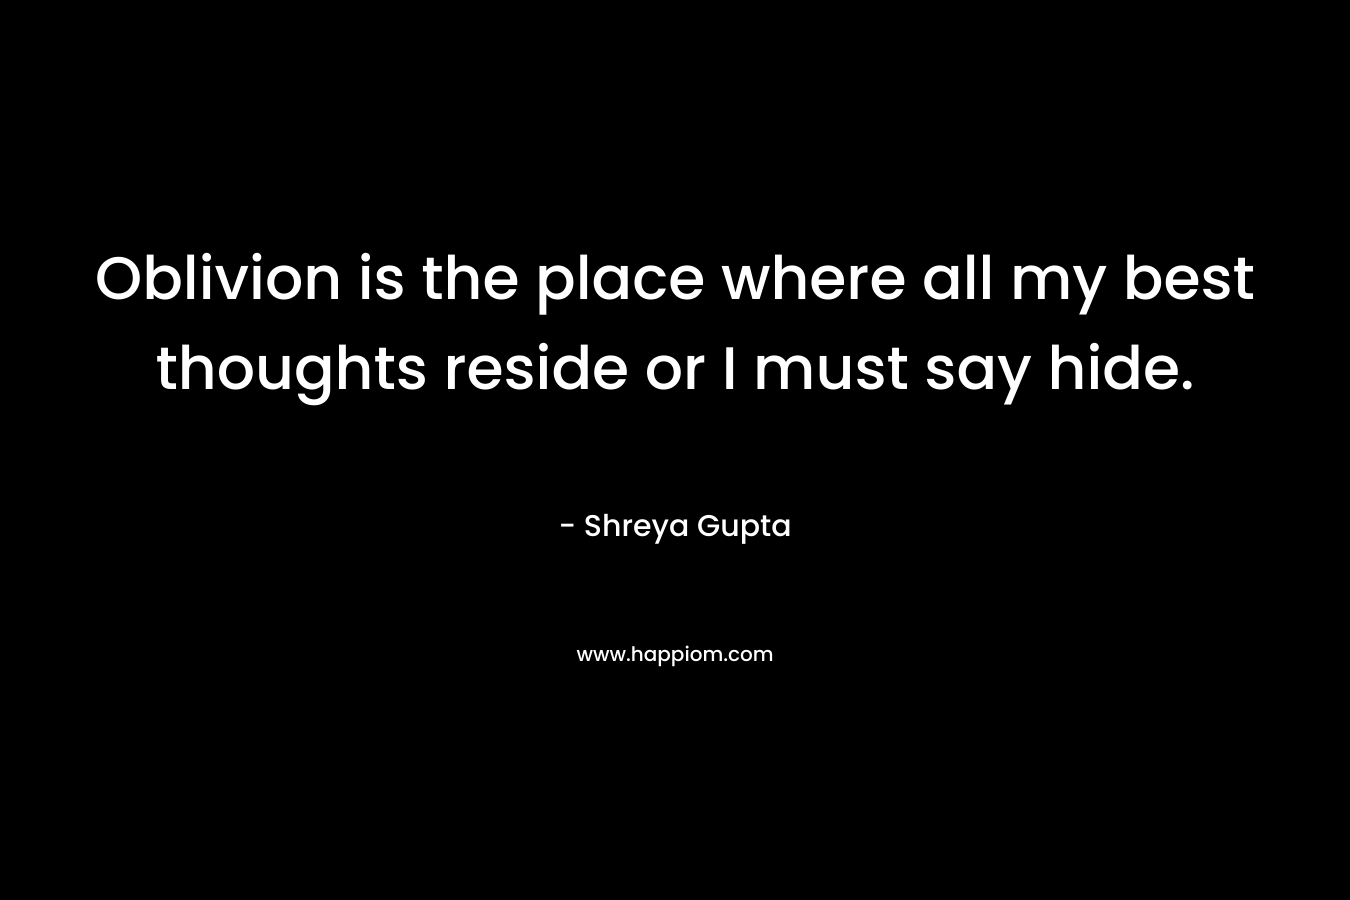 Oblivion is the place where all my best thoughts reside or I must say hide. – Shreya Gupta